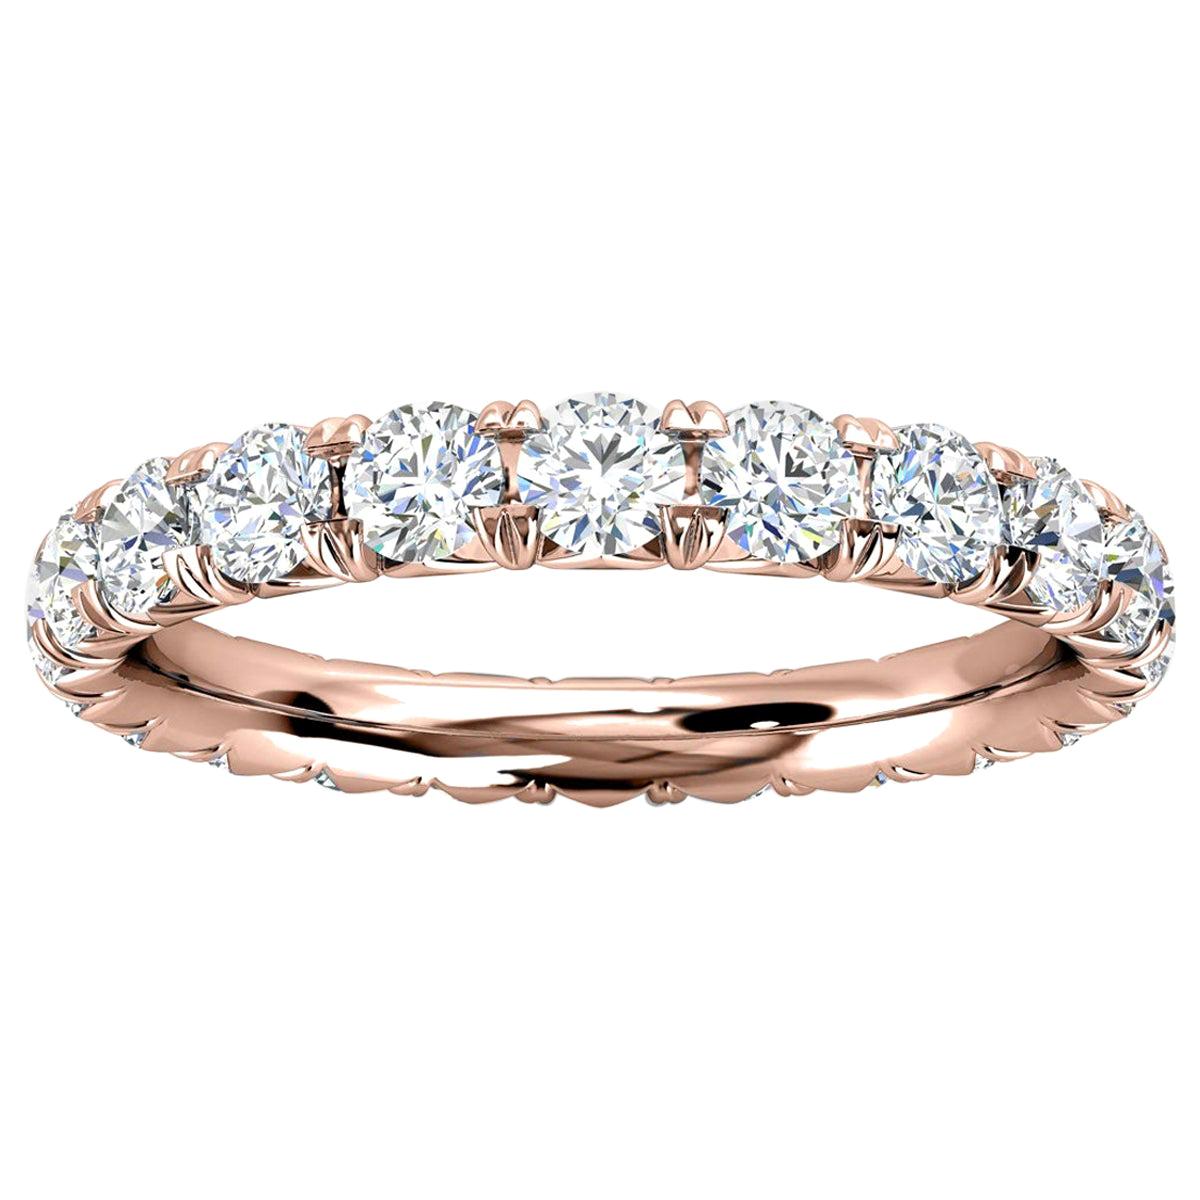 For Sale:  14k Rose Gold Mia French Pave Diamond Eternity Ring '1 1/2 Ct. Tw'